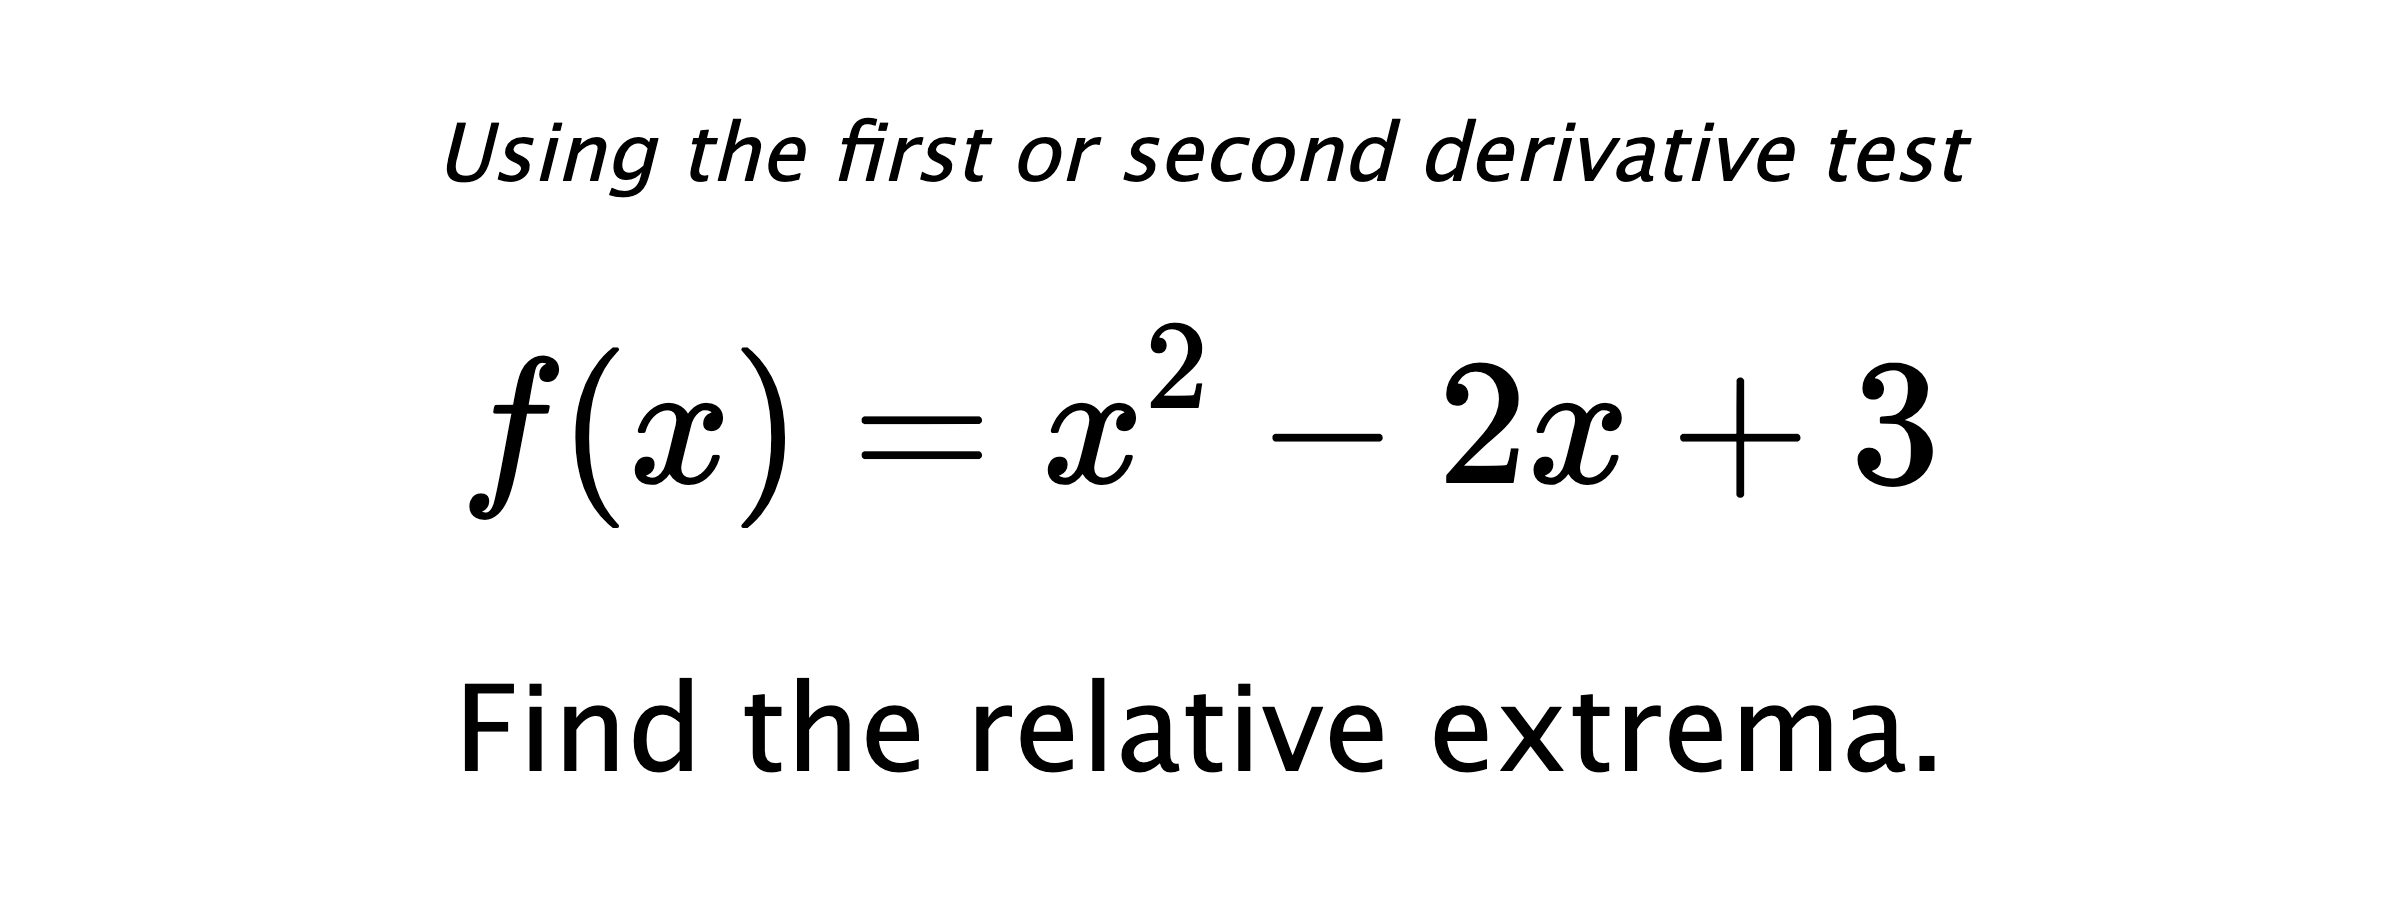 Using the first or second derivative test $$ f(x)=x^2-2x+3 $$ Find the relative extrema.